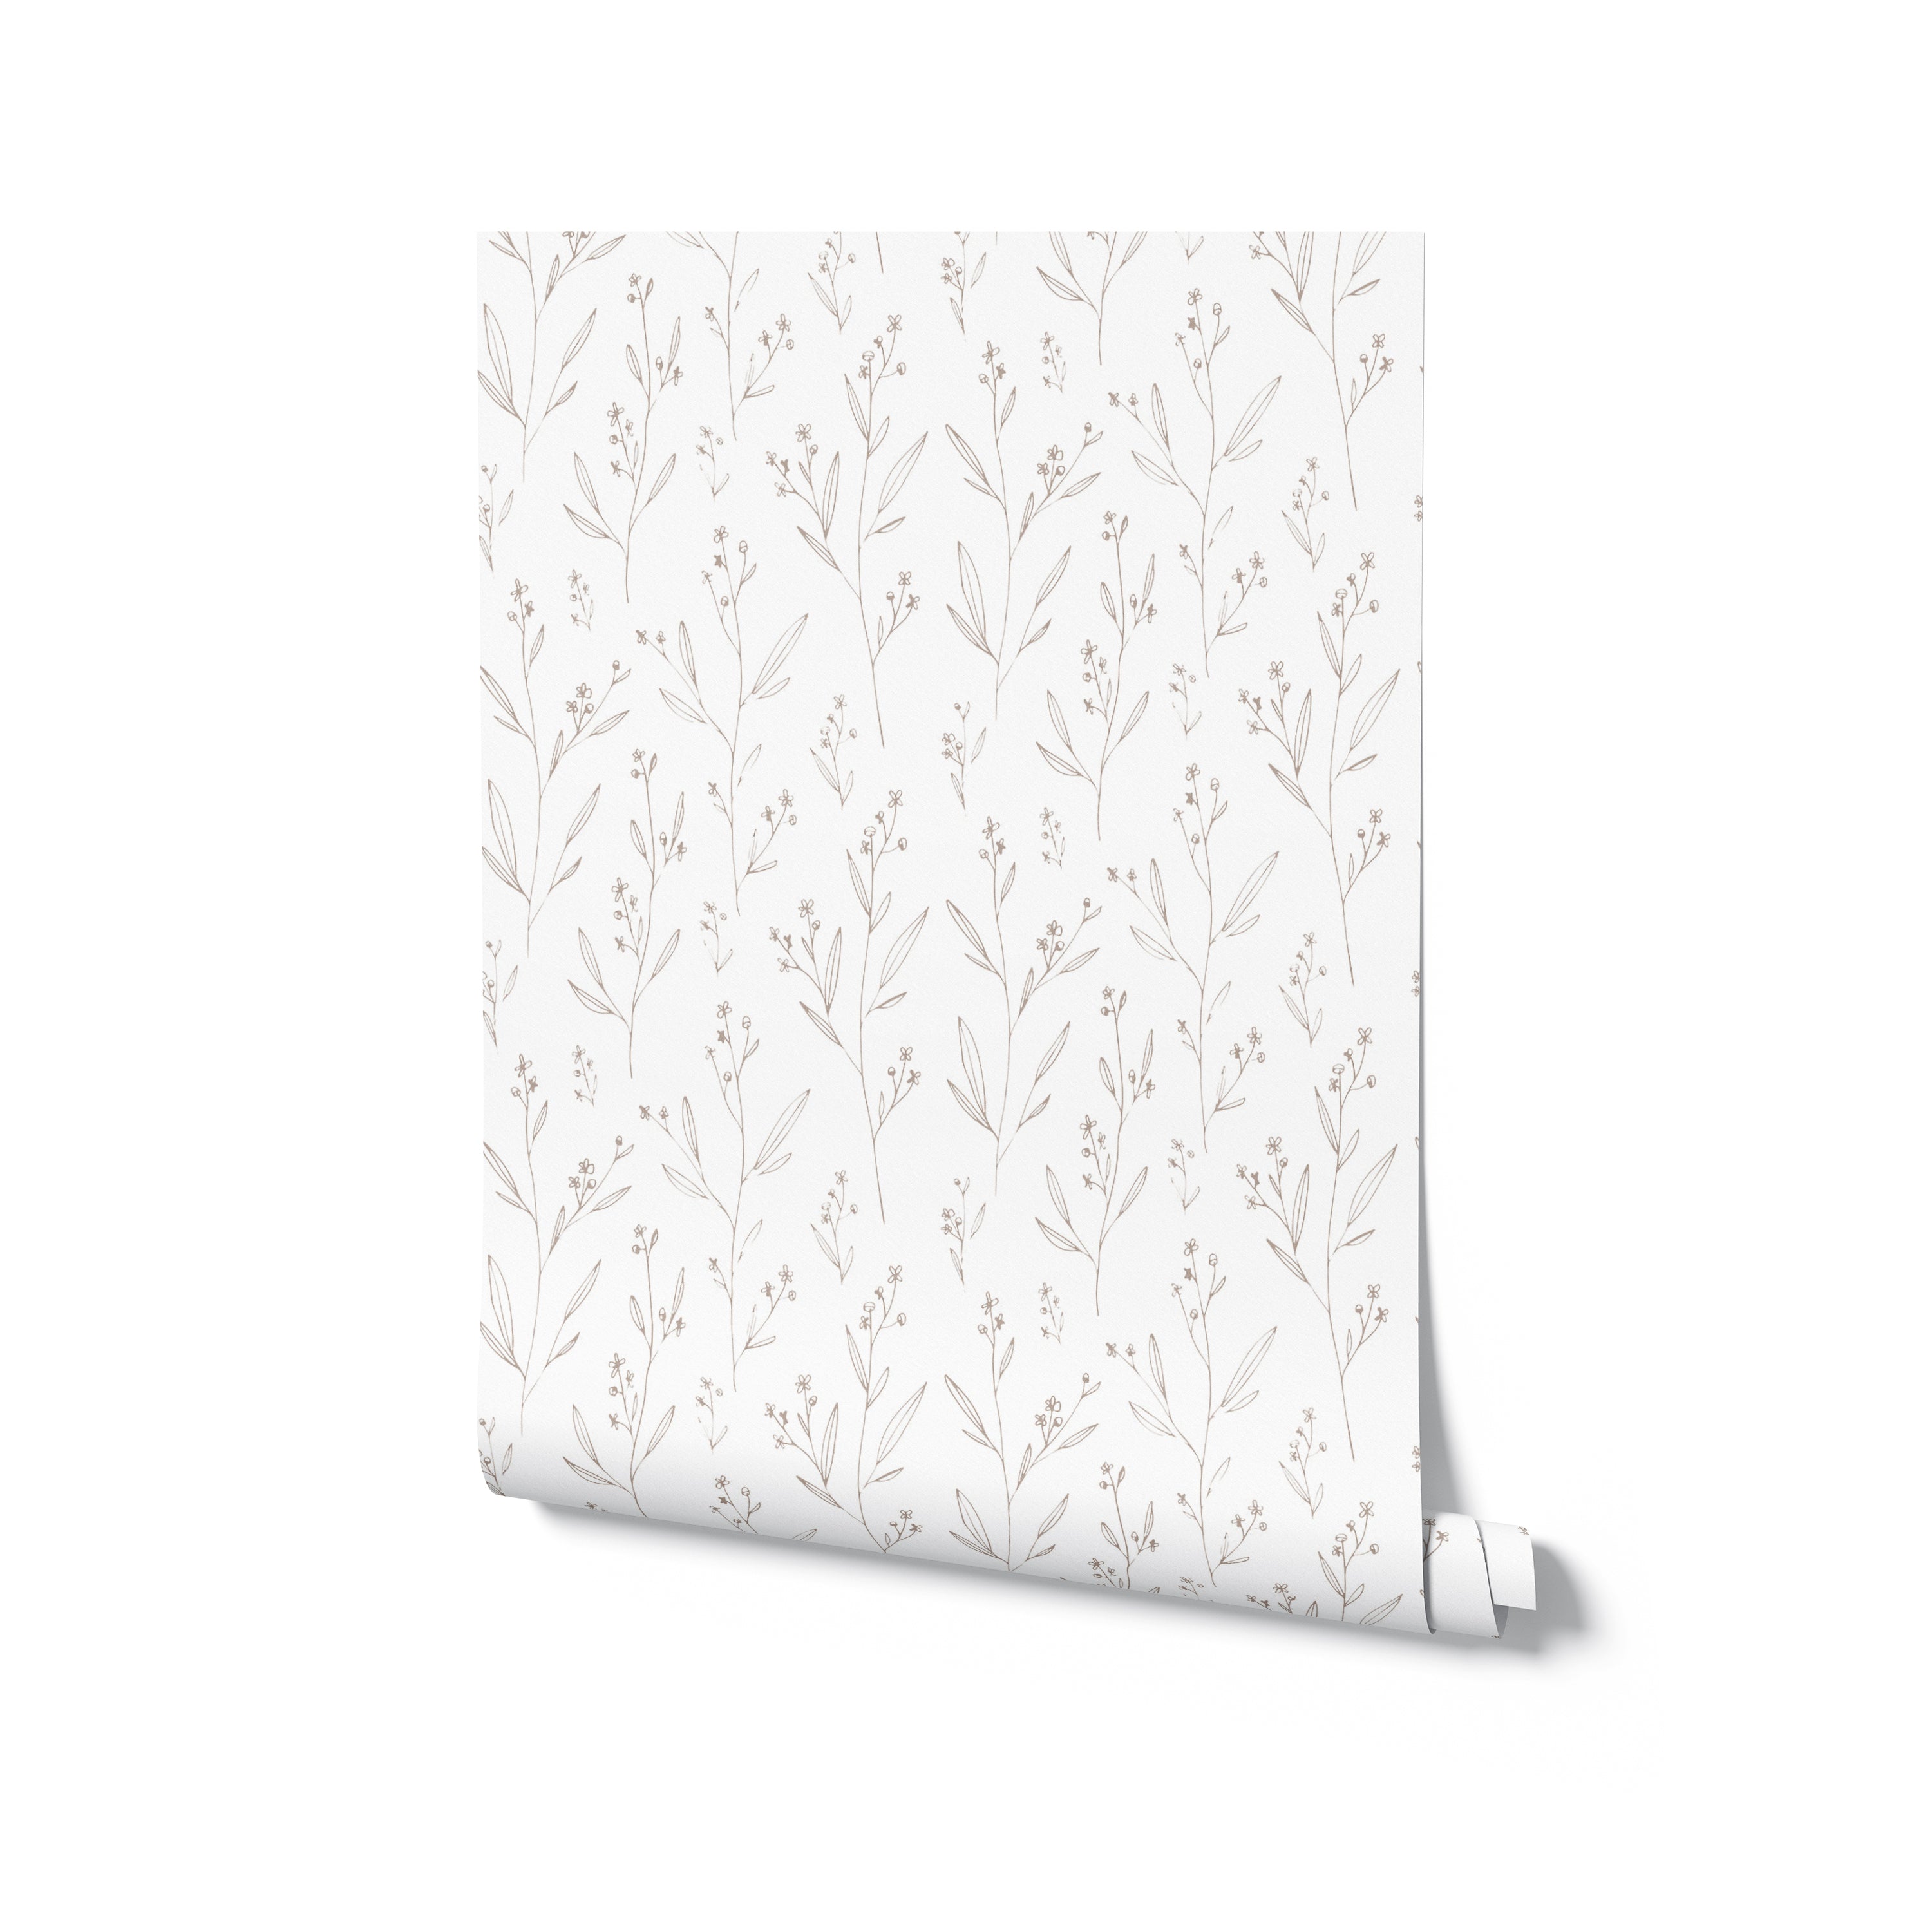 Roll of Dainty Minimal Floral Beige Wallpaper displaying a repeating pattern of delicate linear flowers and leaves, exemplifying a simple yet sophisticated design ideal for modern and minimalist decor styles.